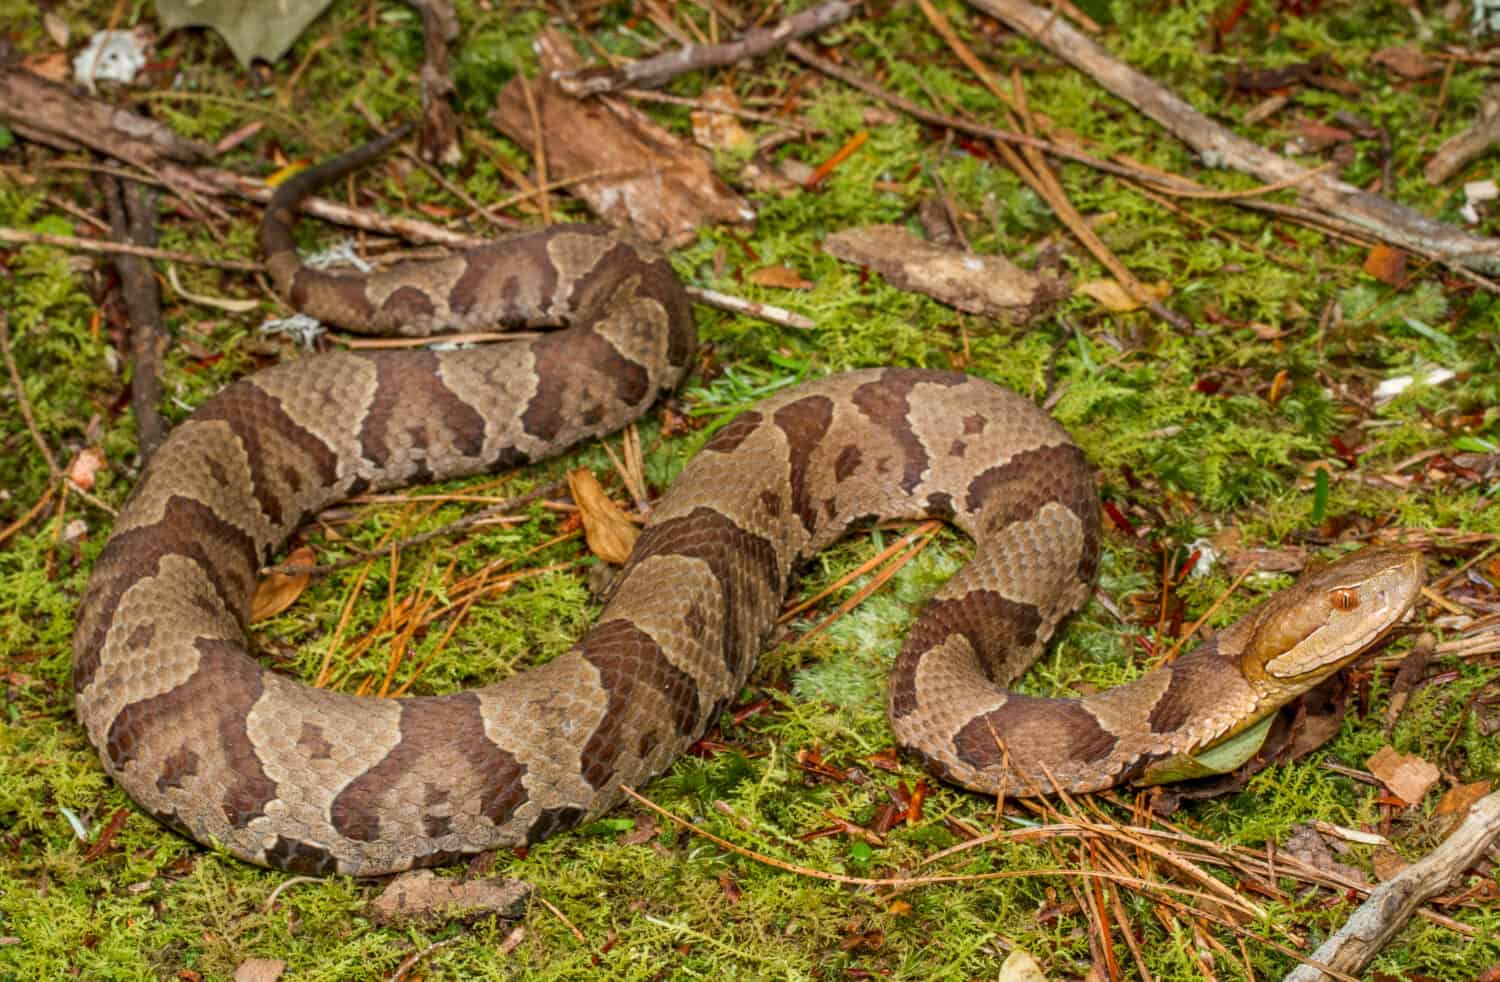 The Copperhead Snake is a venomous species of pit viper found in the United States. It has a copper-colored head and an orange-brown body with dark crossbands. 